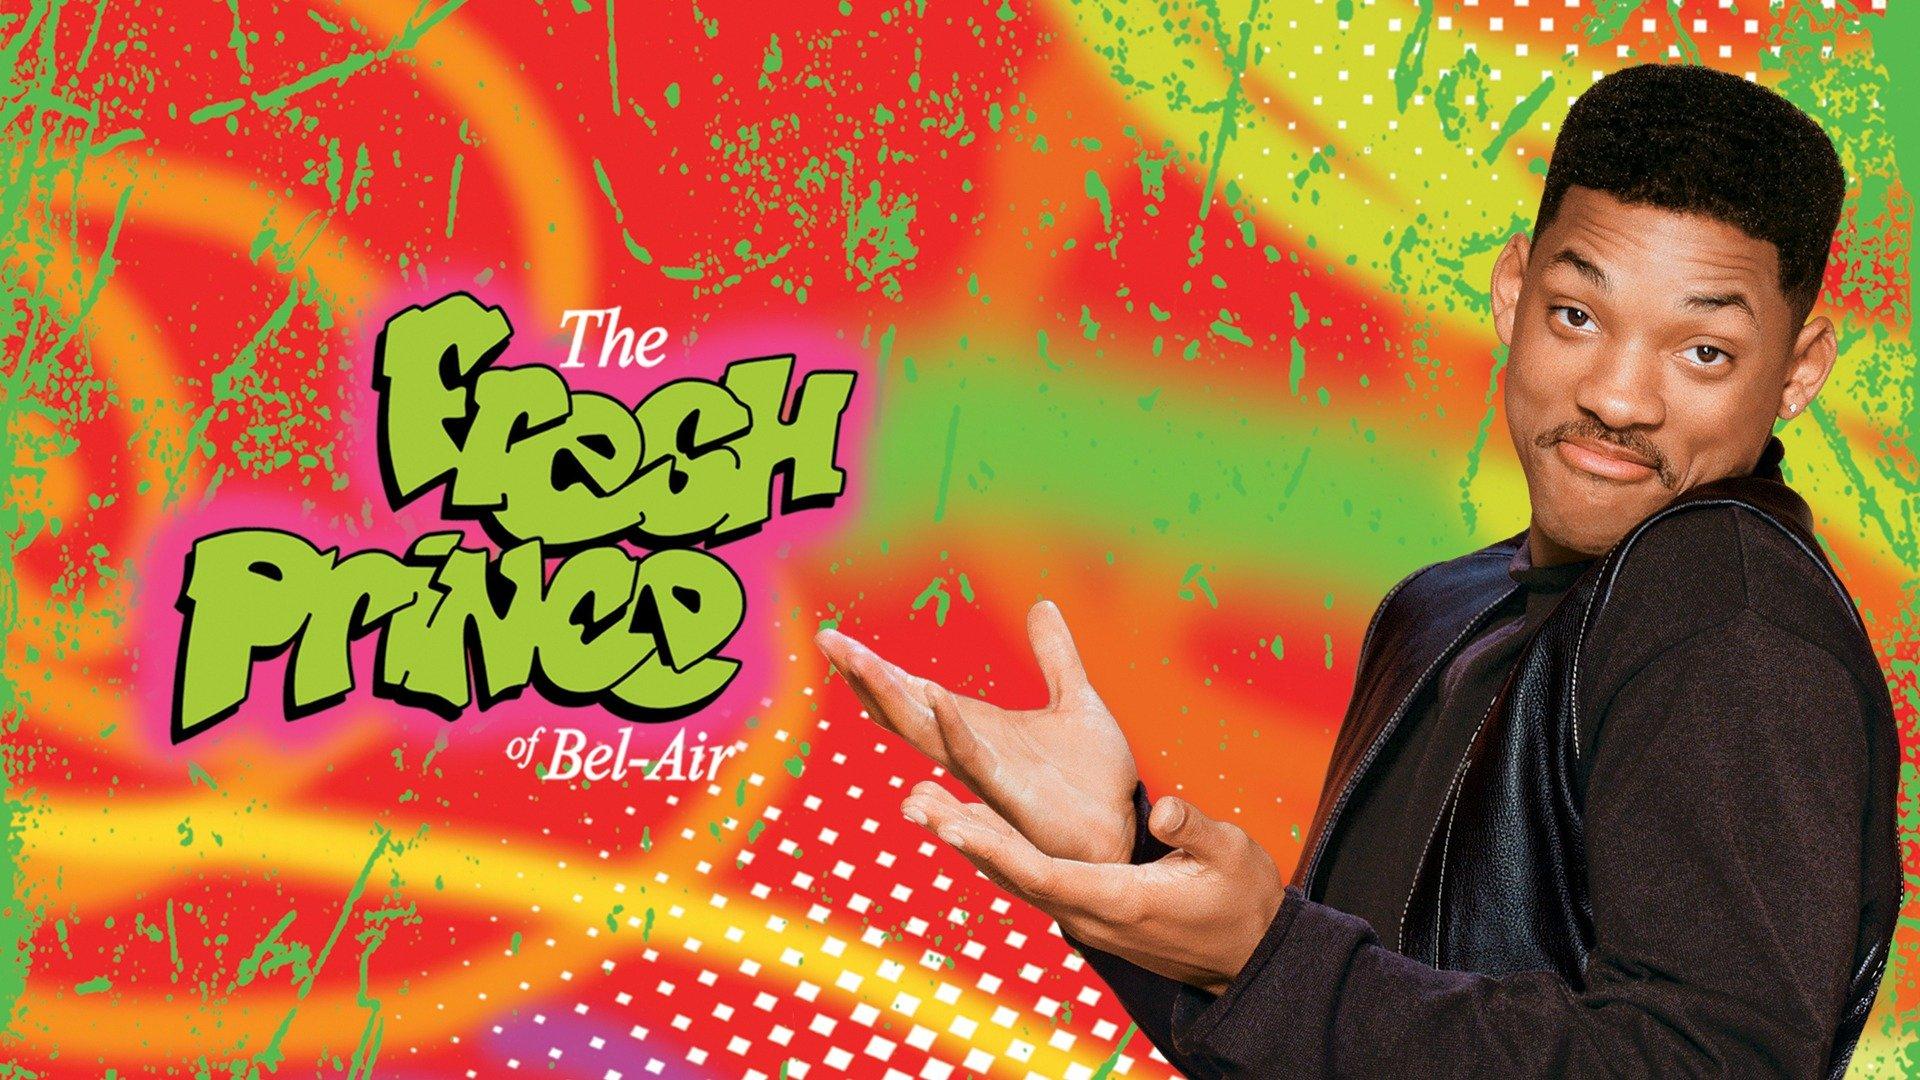 Watch The Fresh Prince of BelAir Streaming Online on Philo (Free Trial)